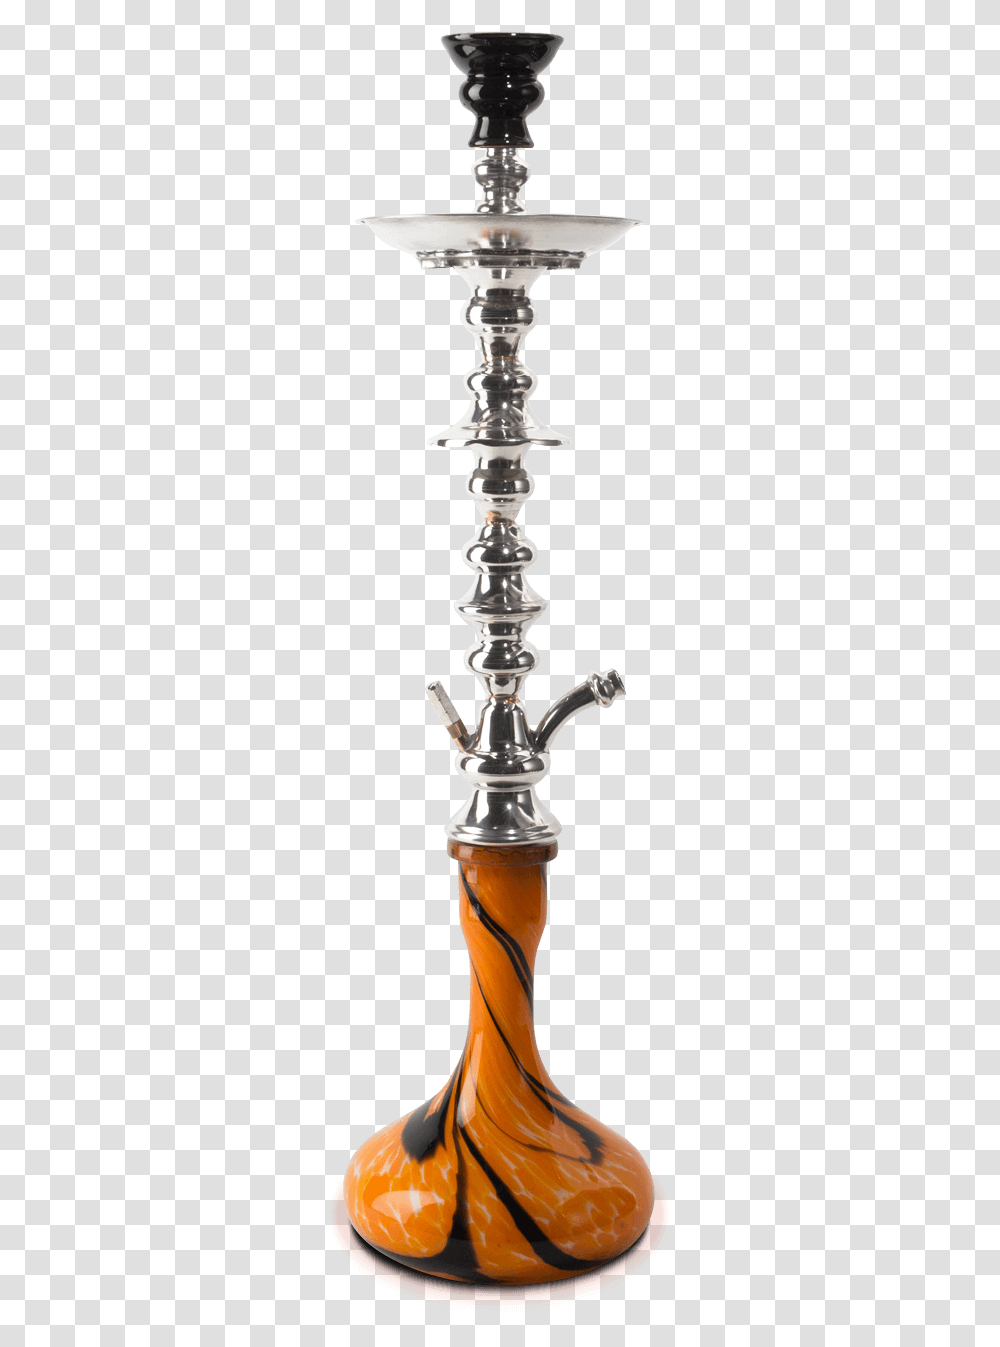 Gold Hookah Bottle, Lamp, Chess, Game, Glass Transparent Png